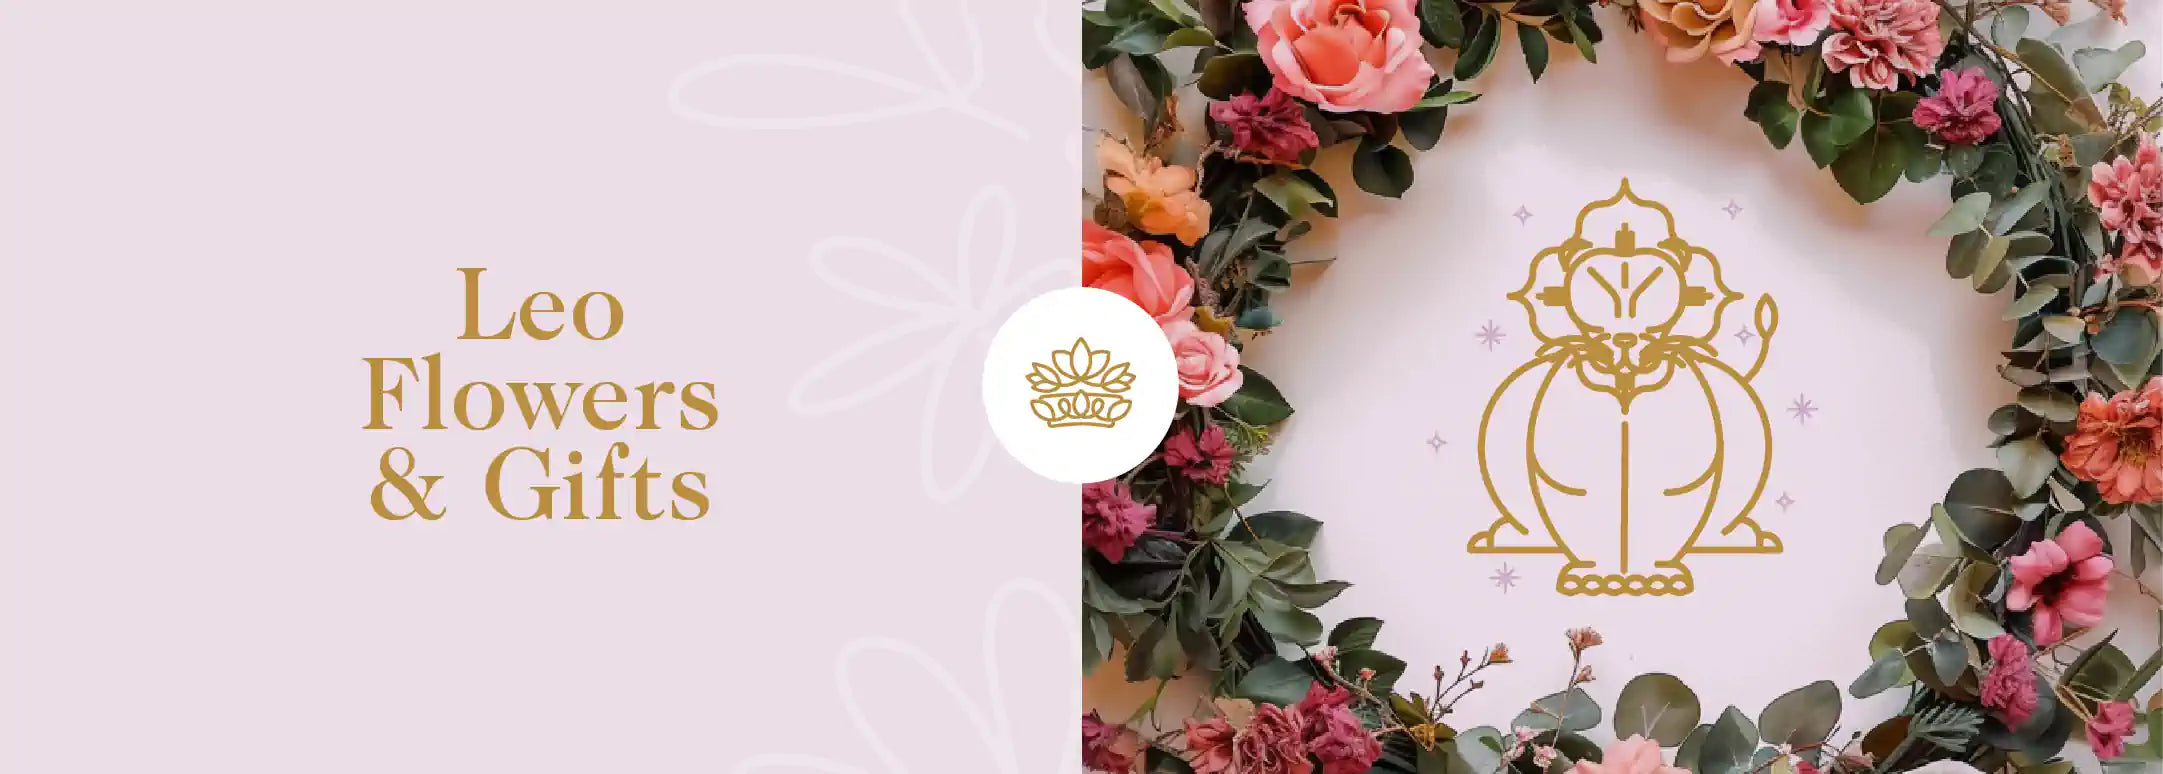 Leo Flowers and Gifts: Stunning Floral Wreath Surrounding a Leo Zodiac Symbol, Perfect for Leo Birthdays and Celebrations. Fabulous Flowers and Gifts.